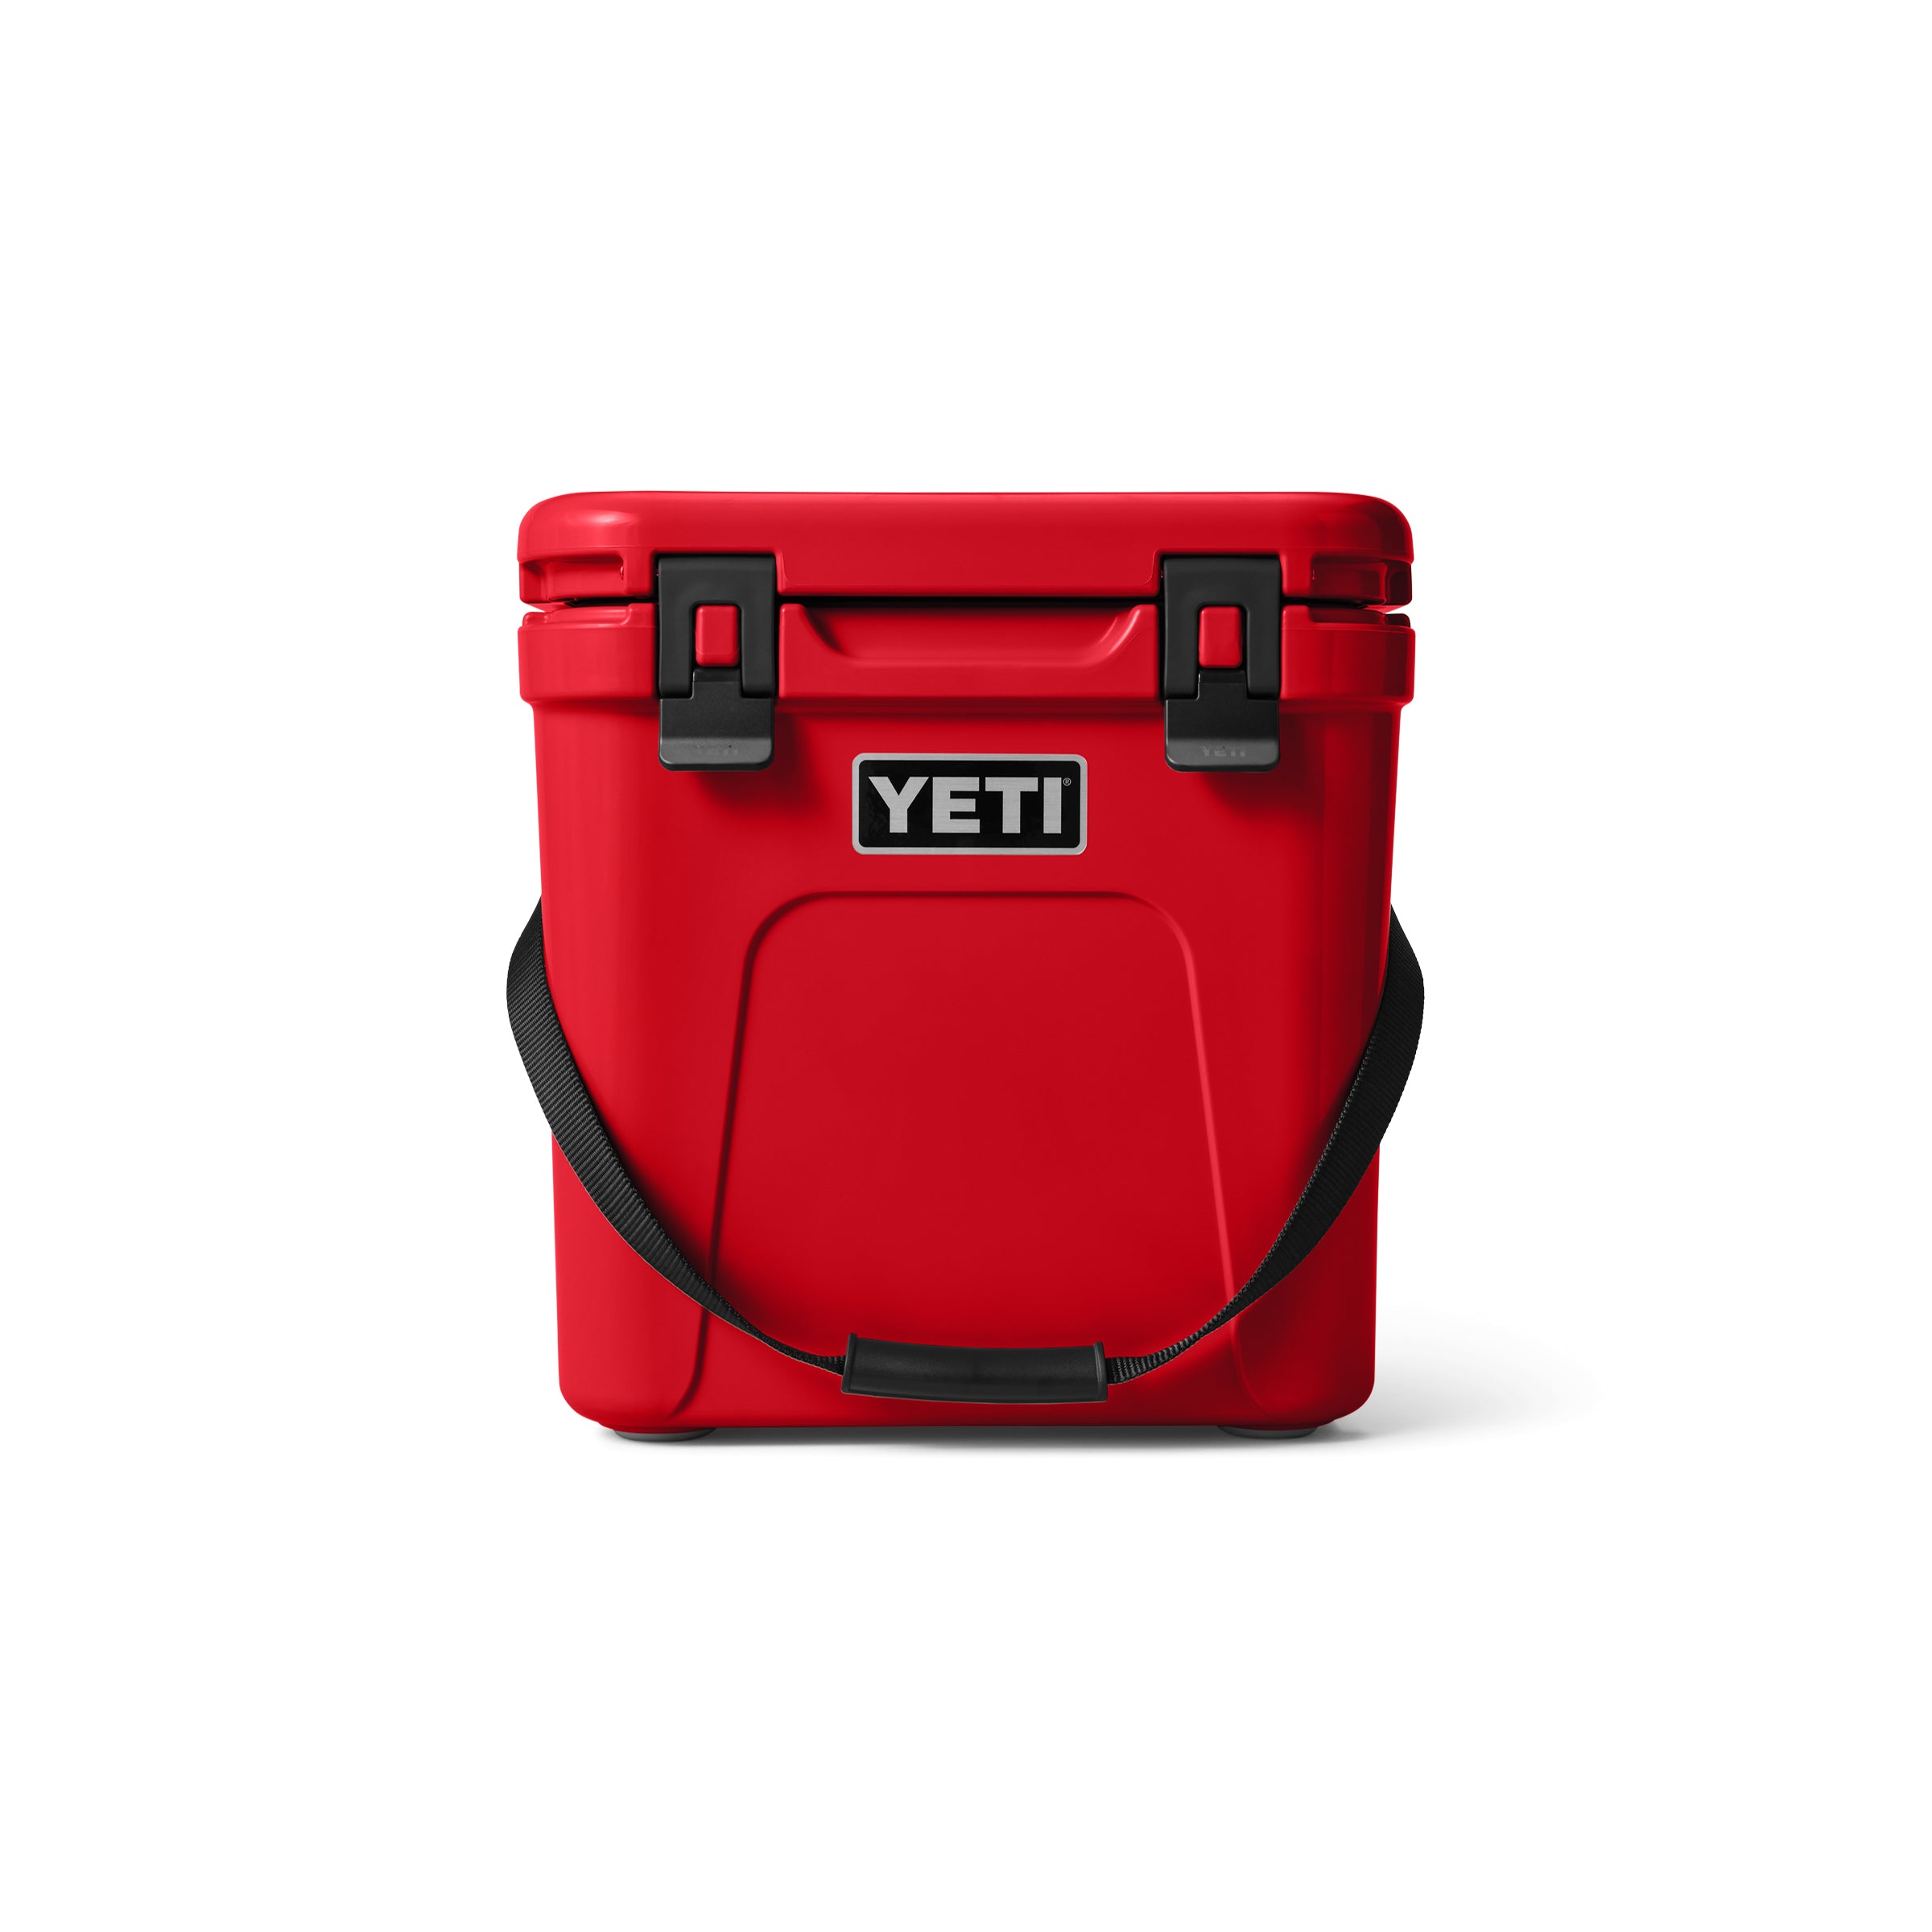 Yeti Roadie 24 - 24 LT / RESCUE RED - Mansfield Hunting & Fishing - Products to prepare for Corona Virus